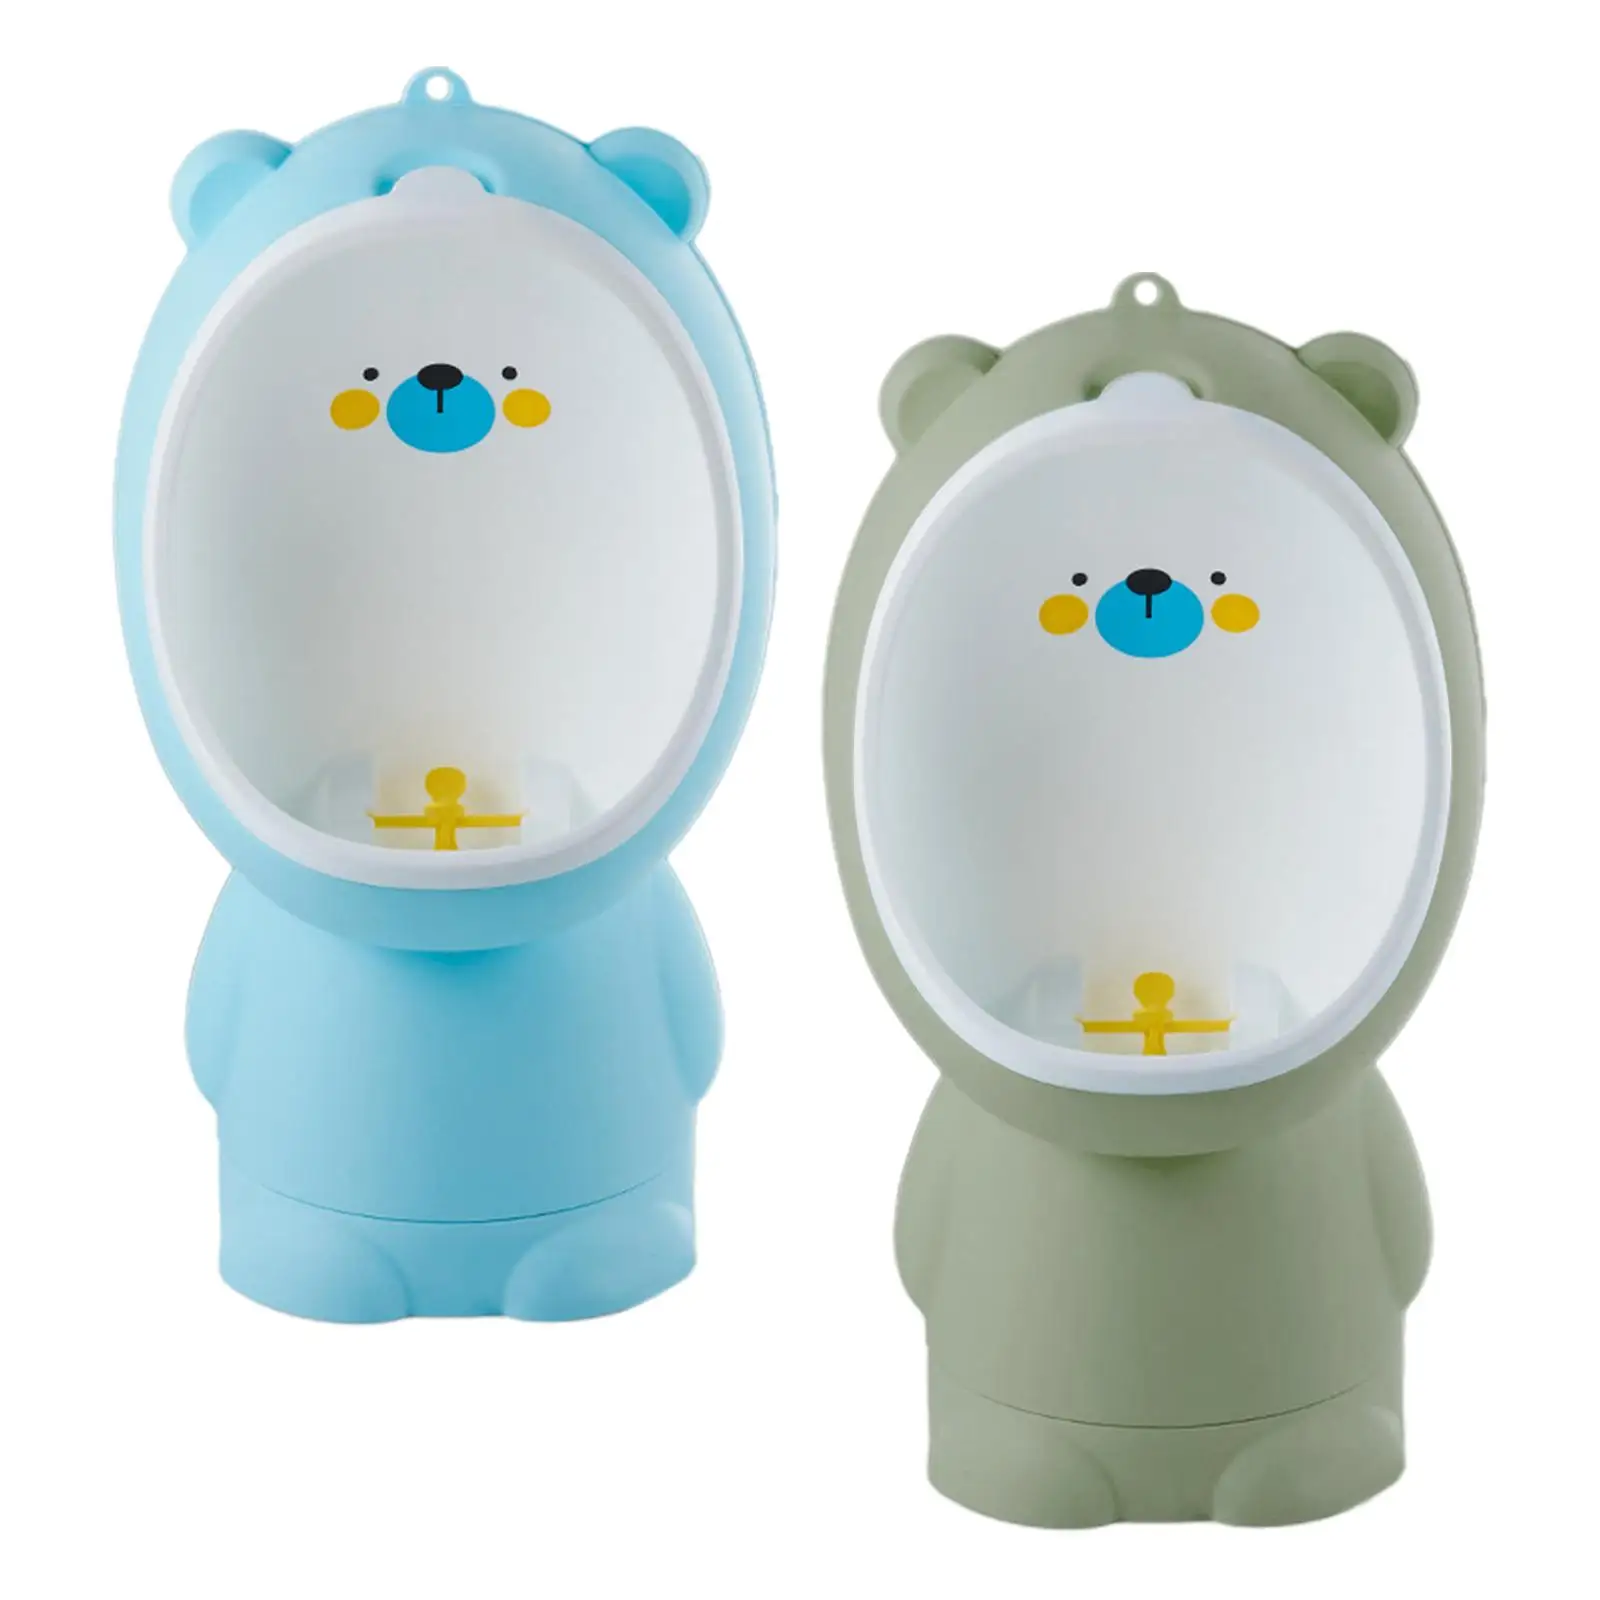 Standing Potty Cute Bear Potty Trainer Urinal Urinal Pee Trainer Wall Mounted for Kids Toddlers Child Boys Baby